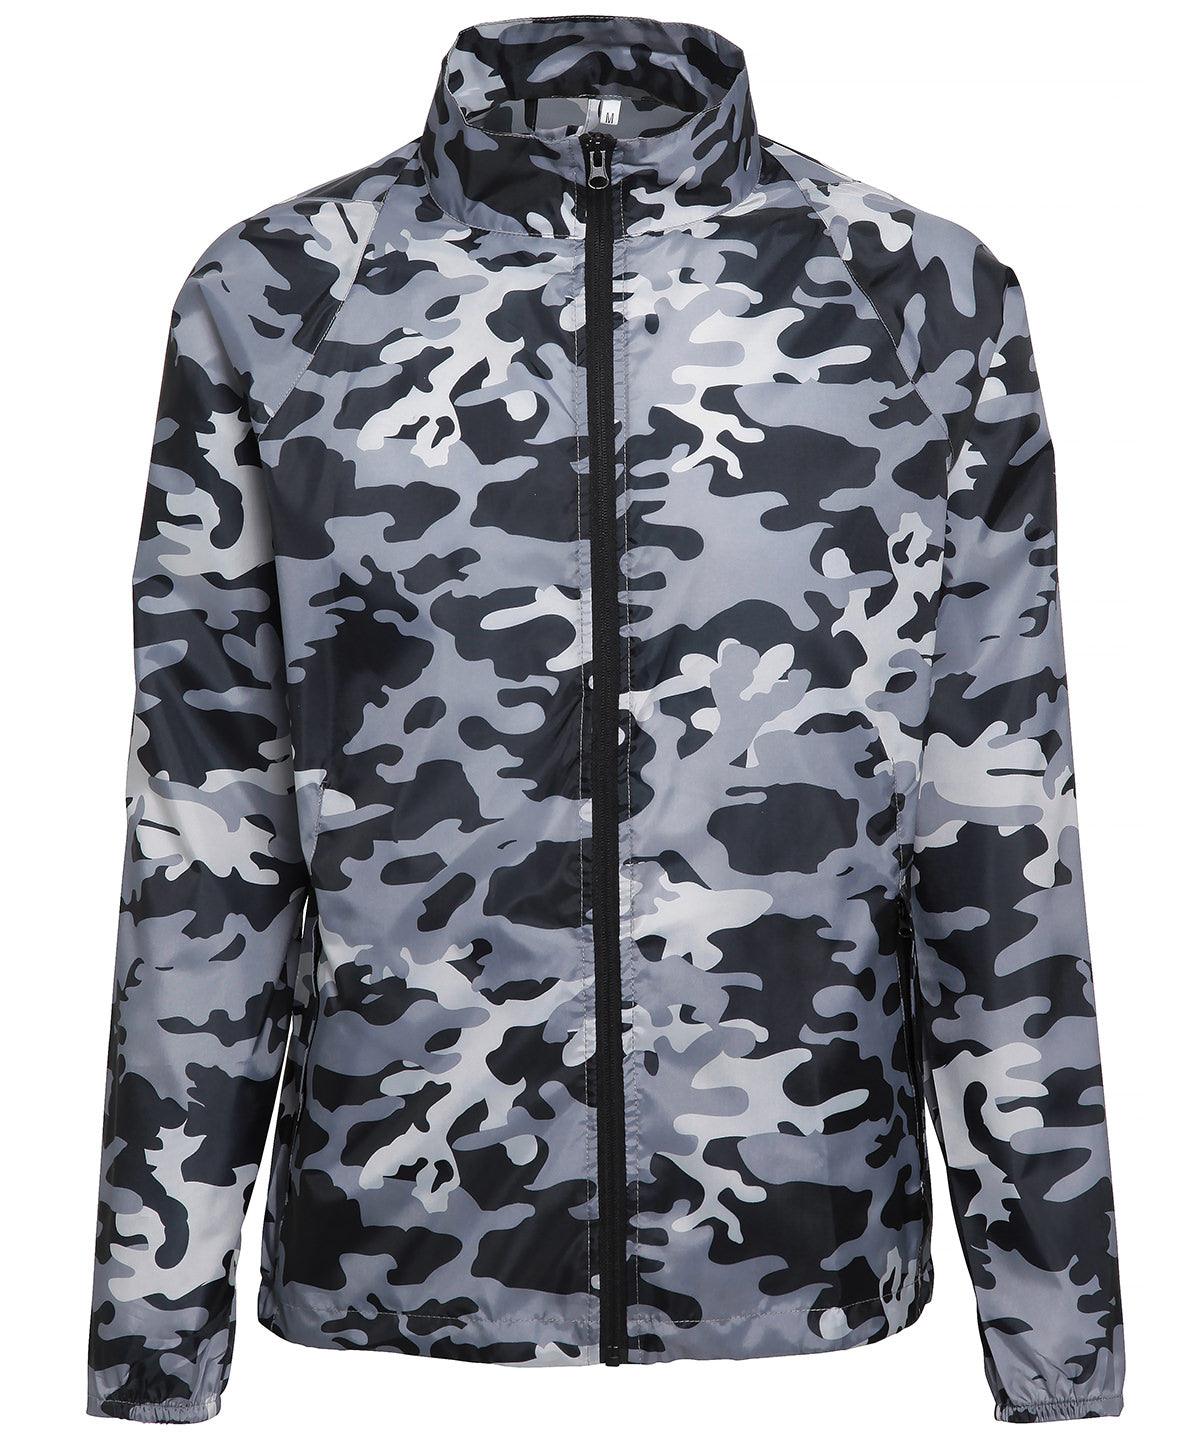 Bold Camo Grey - Contrast lightweight jacket Jackets 2786 Alfresco Dining, Camo, Jackets & Coats, Lightweight layers, Rebrandable, S/S 19 Trend Colours Schoolwear Centres